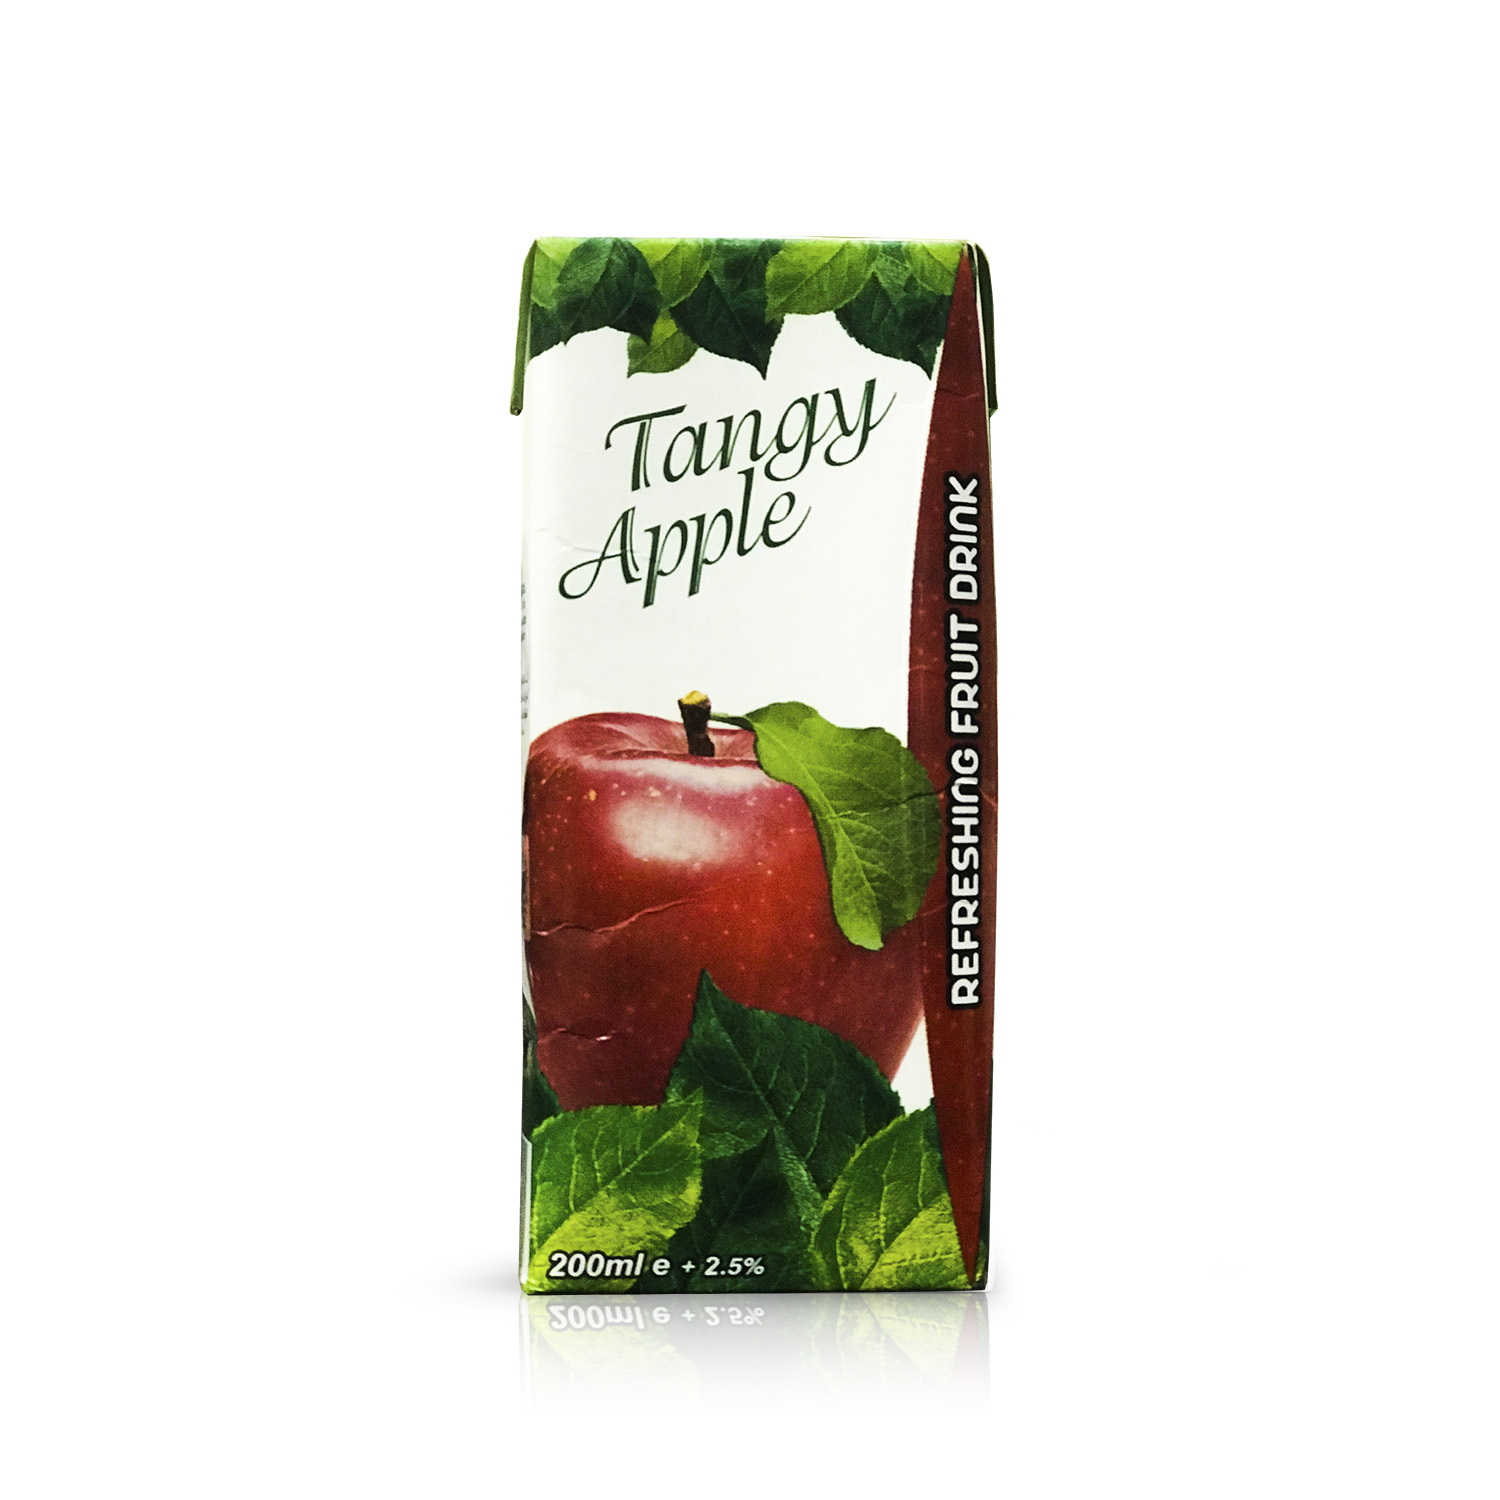 TANGY APPLE